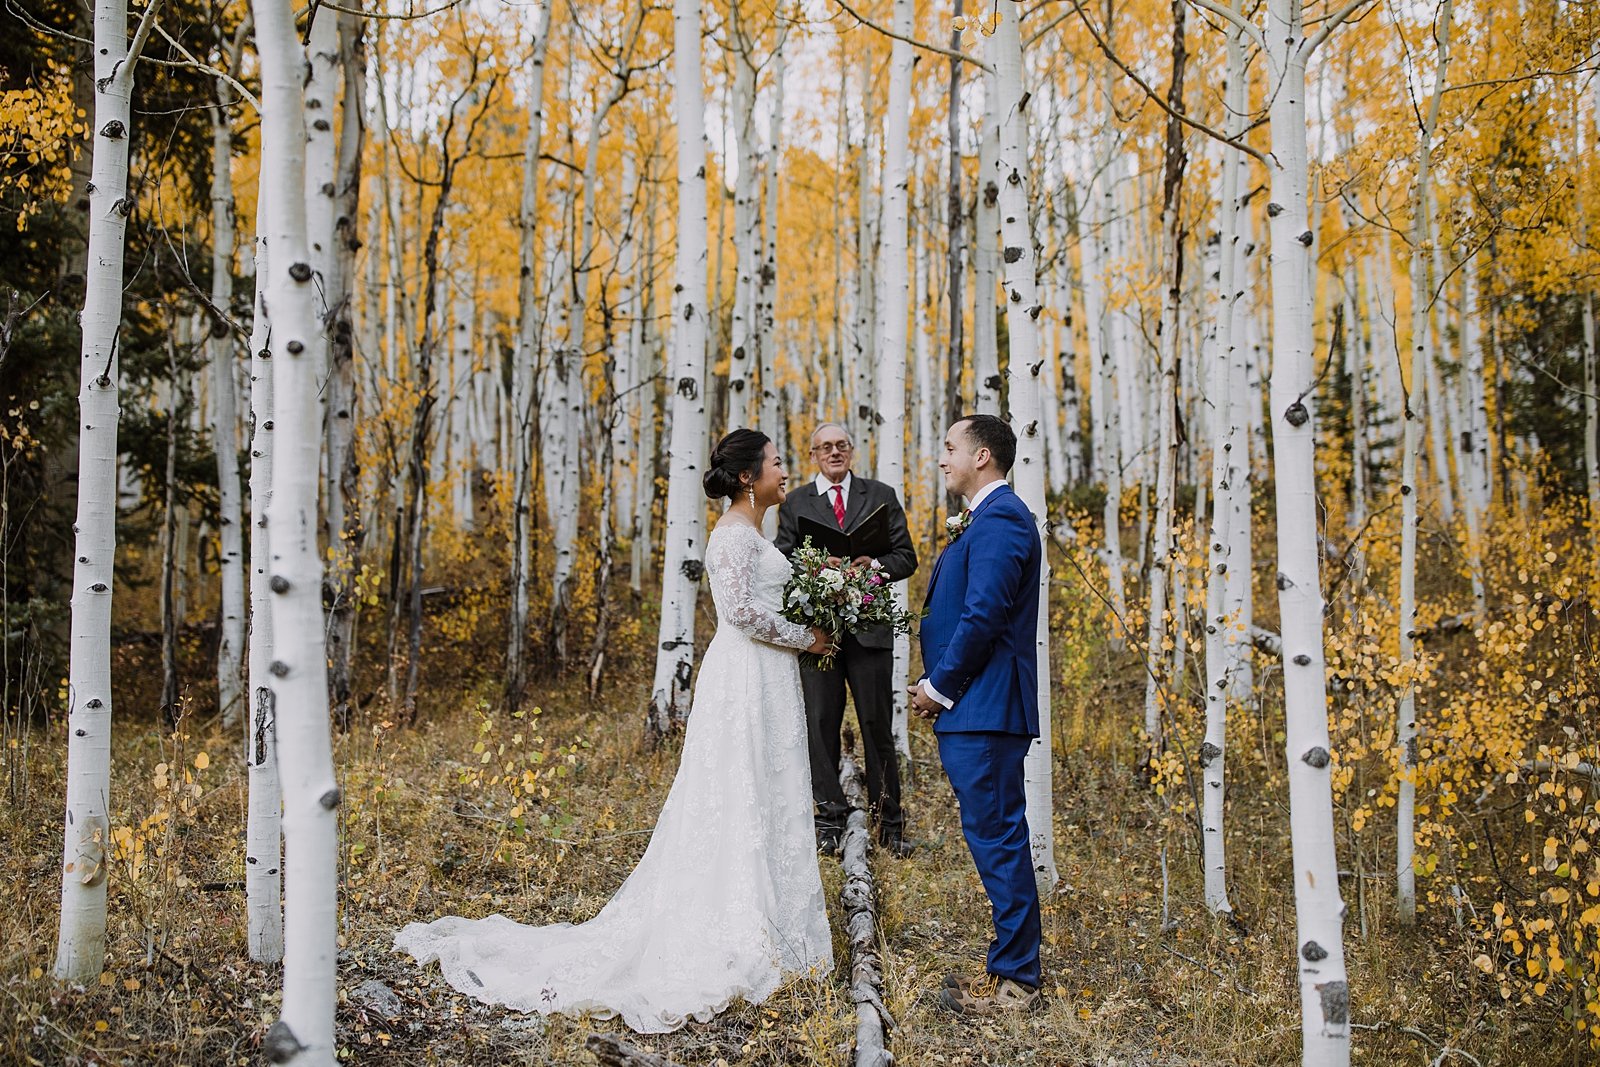 elopement ceremony in an aspen grove, ames colorado elopement, alta lakes elopement, ophir colorado elopement, telluride colorado wedding, hope lake elopement, priest lake elopement